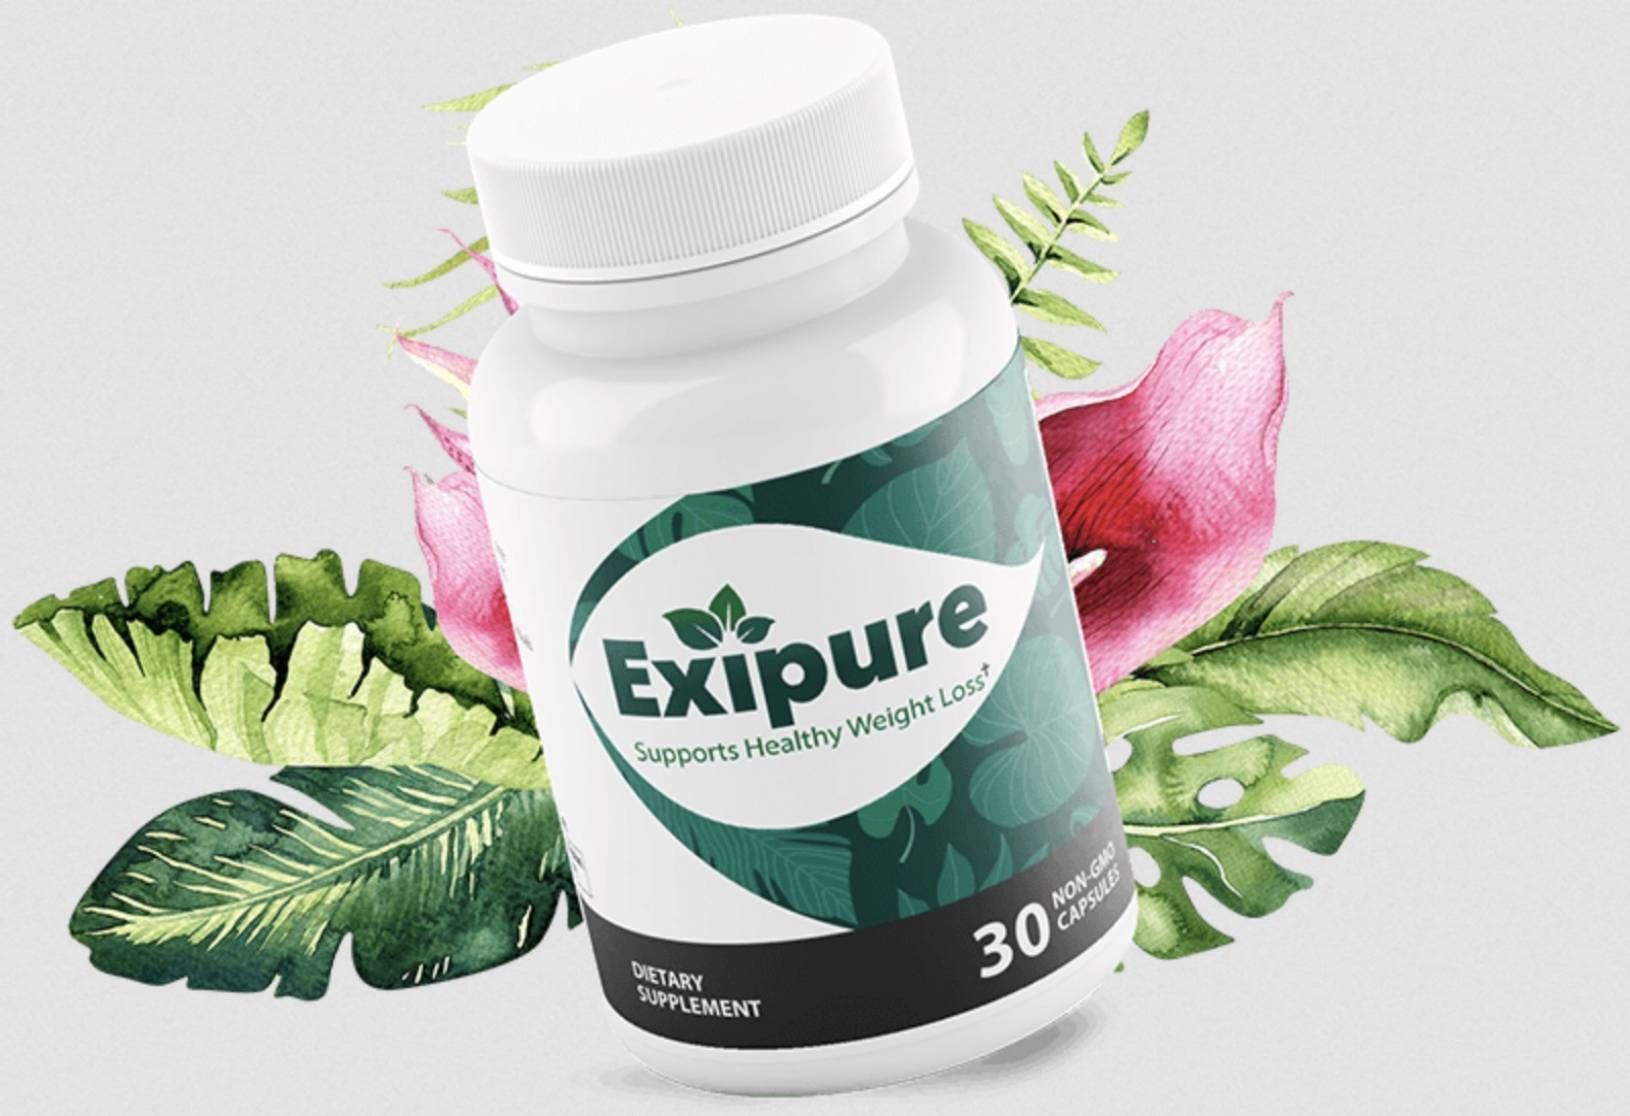 Exipure Tablets On Sale